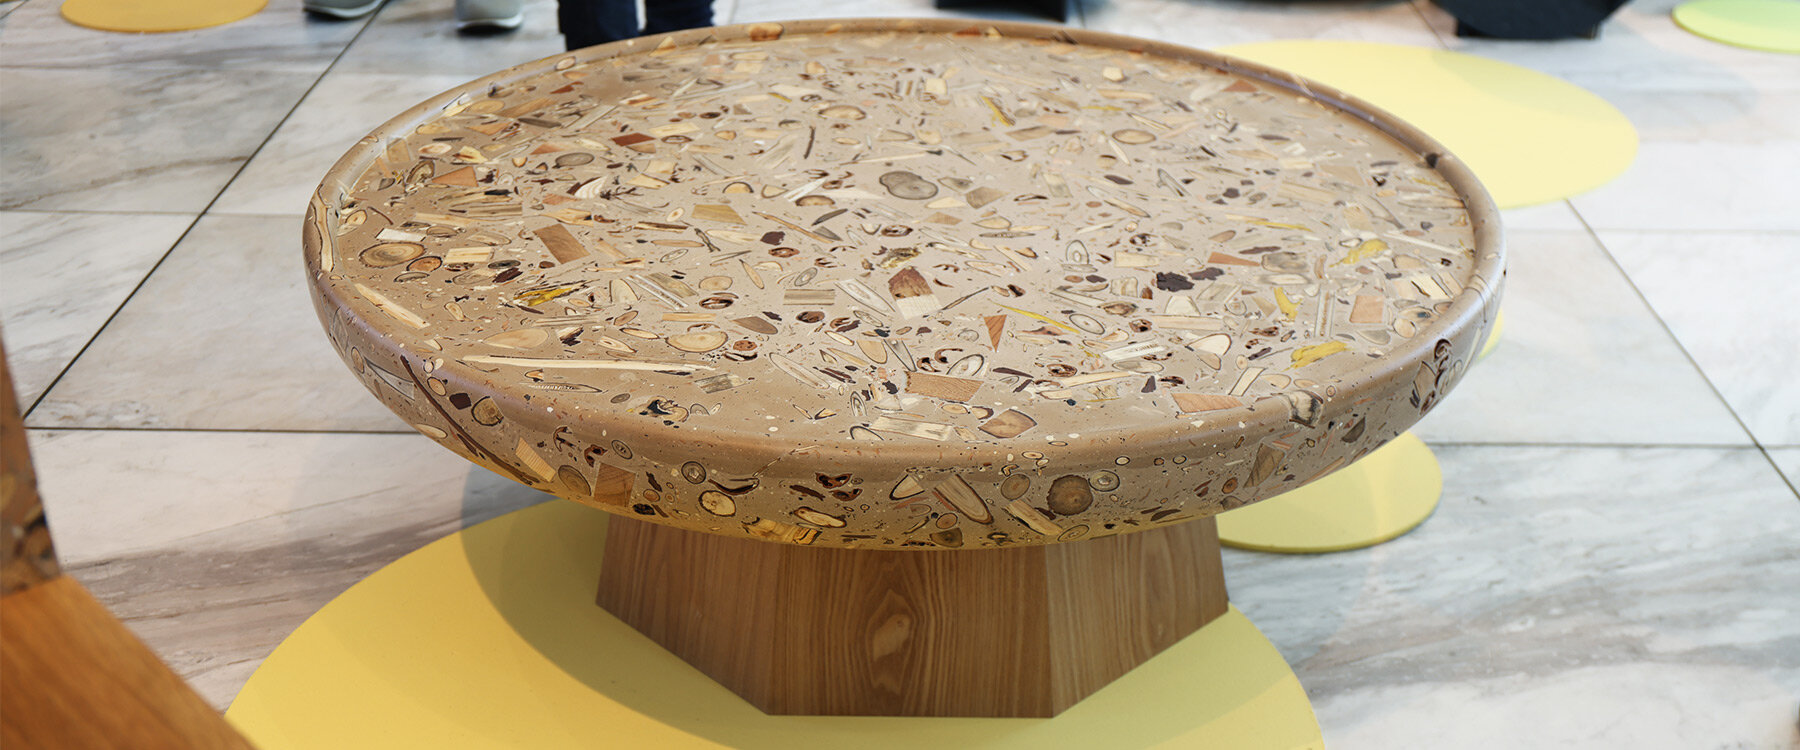 forestbank is a new type of wood made from tree debris, leaves, seeds and soil